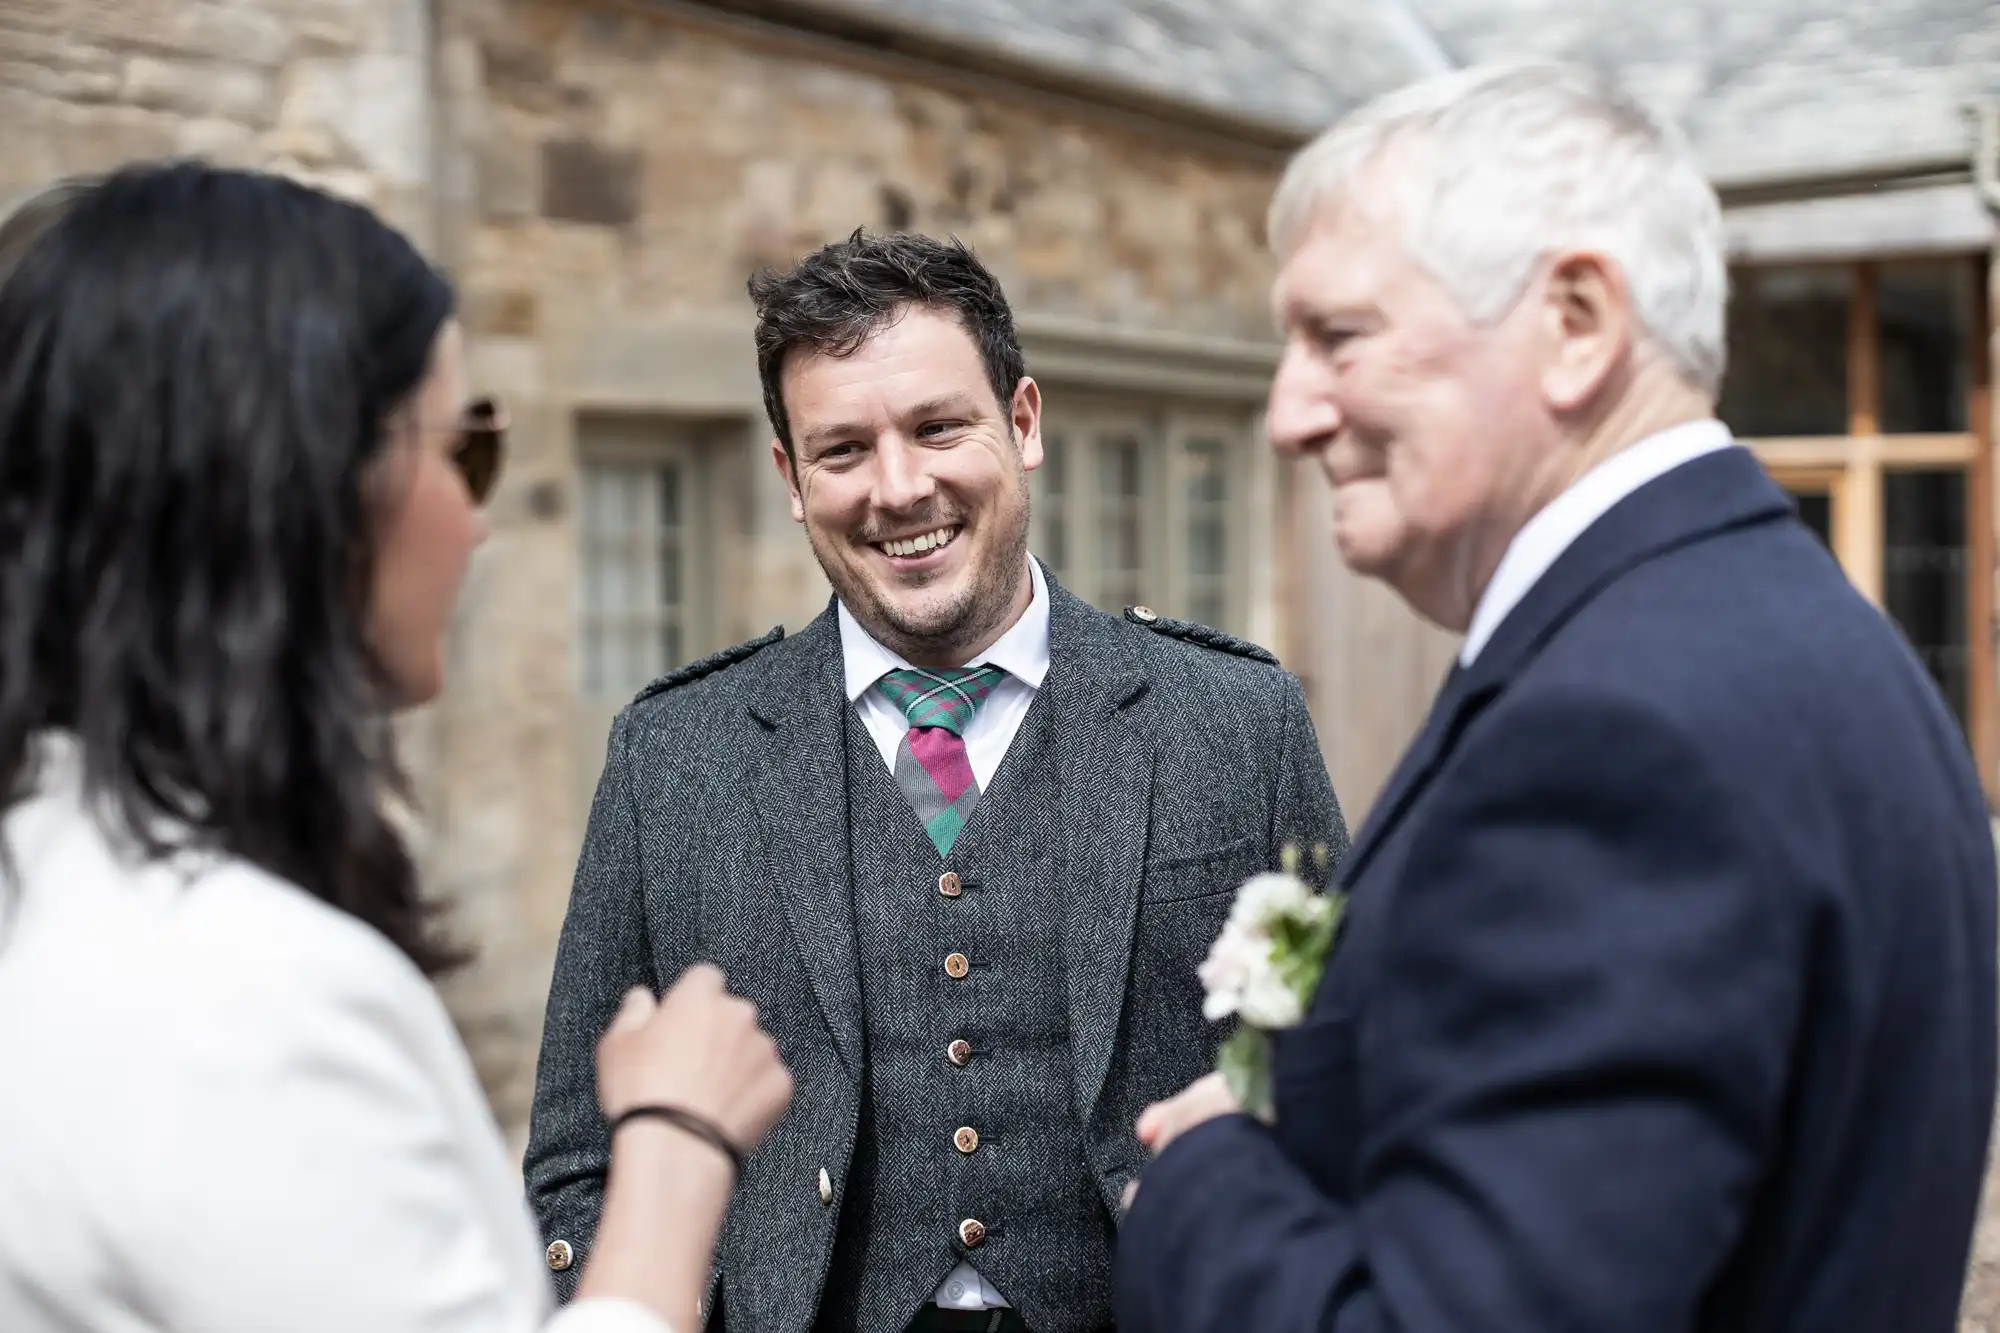 Three people conversing outdoors; a smiling man in a tweed suit with a boutonniere stands between an older man and a woman partially visible.